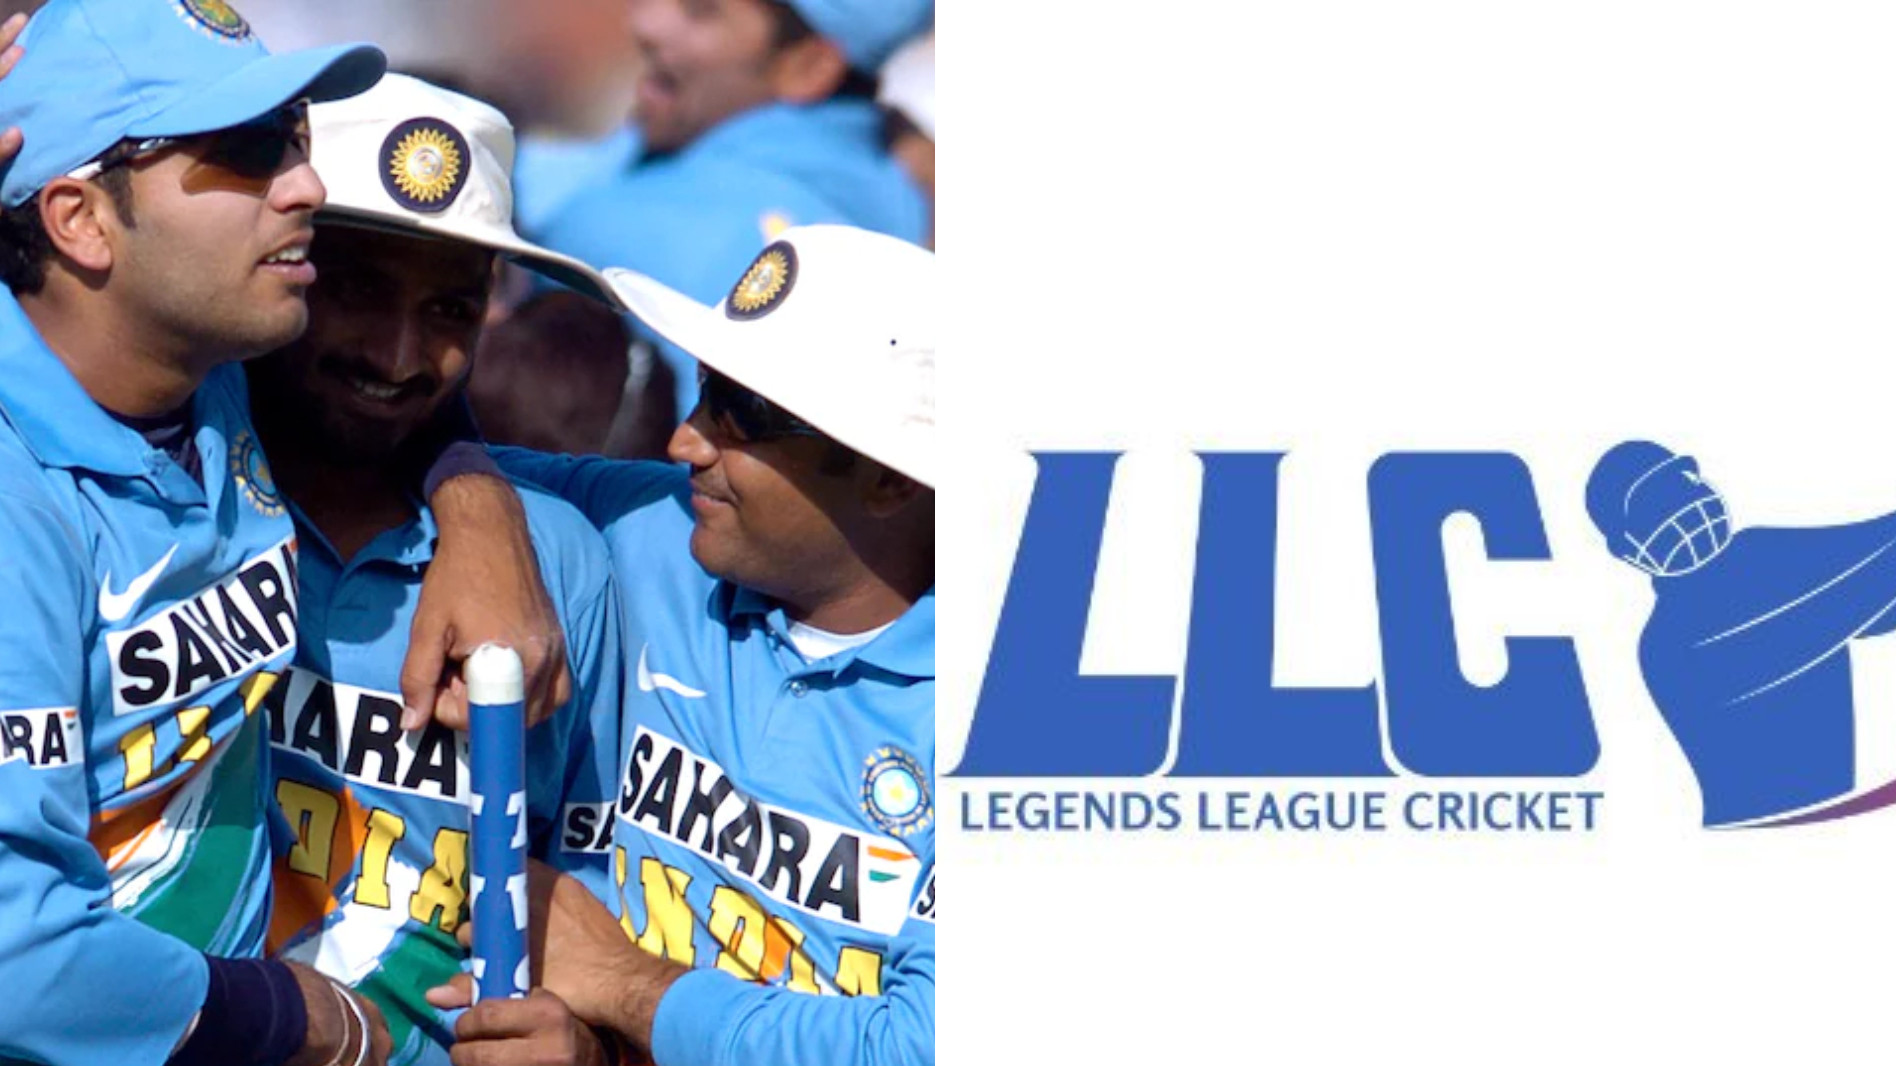 Sehwag, Yuvraj and Harbhajan to be part of inaugural Legends League Cricket (LLC)